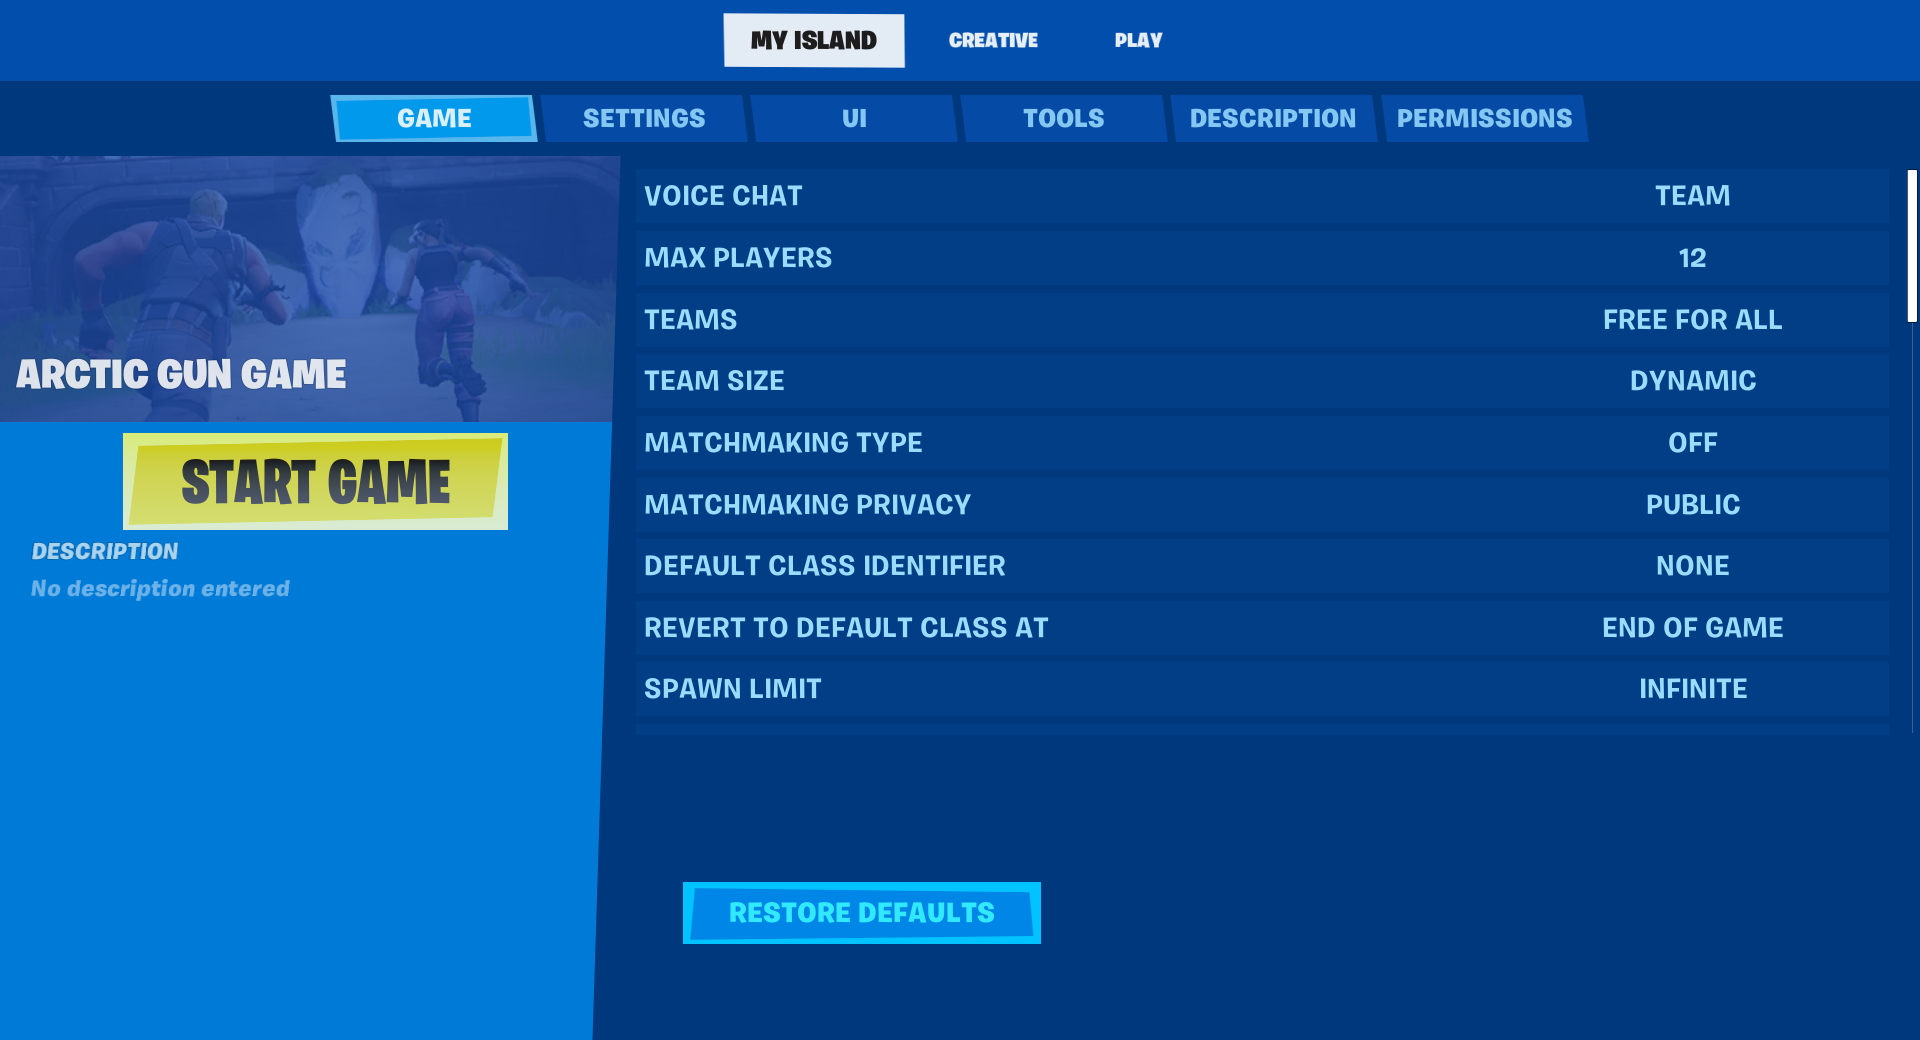 Fortnite Leaderboards and Team Voice Chat Are Here!